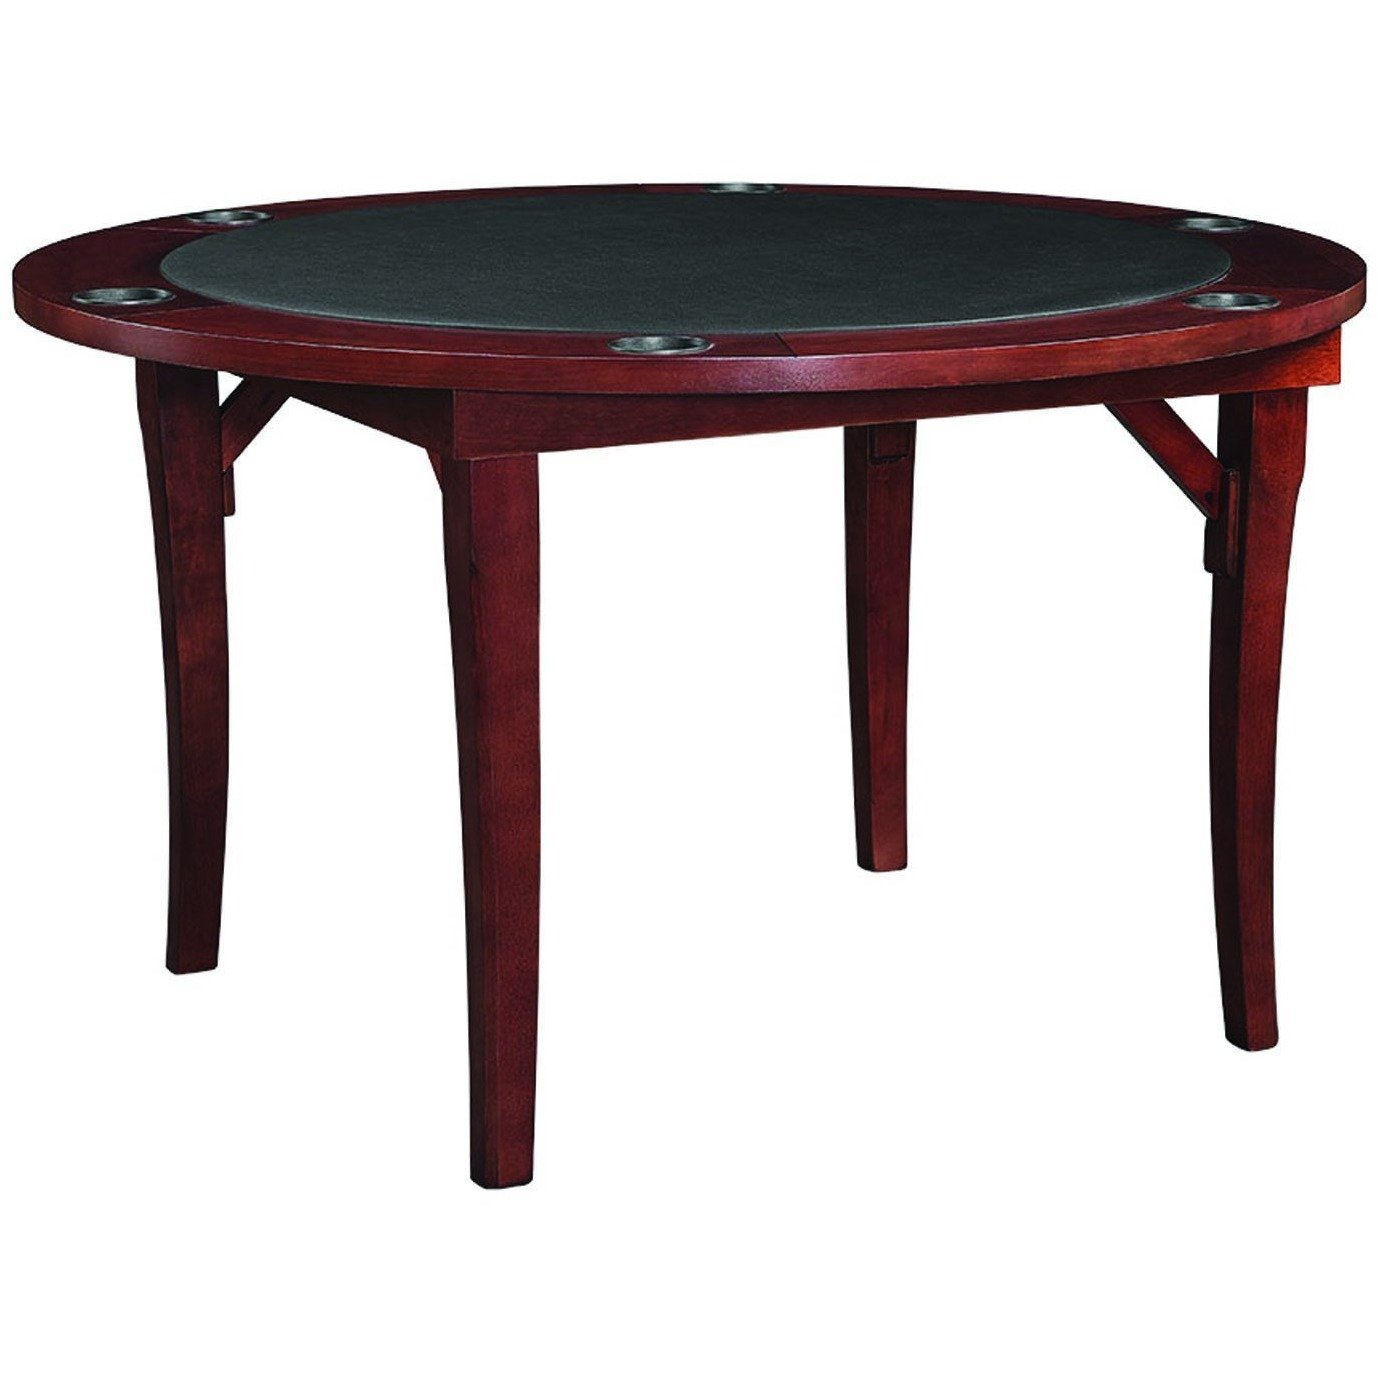 RAM Game Room 48" Round Folding Poker Table 6 Person - Just Poker Tables